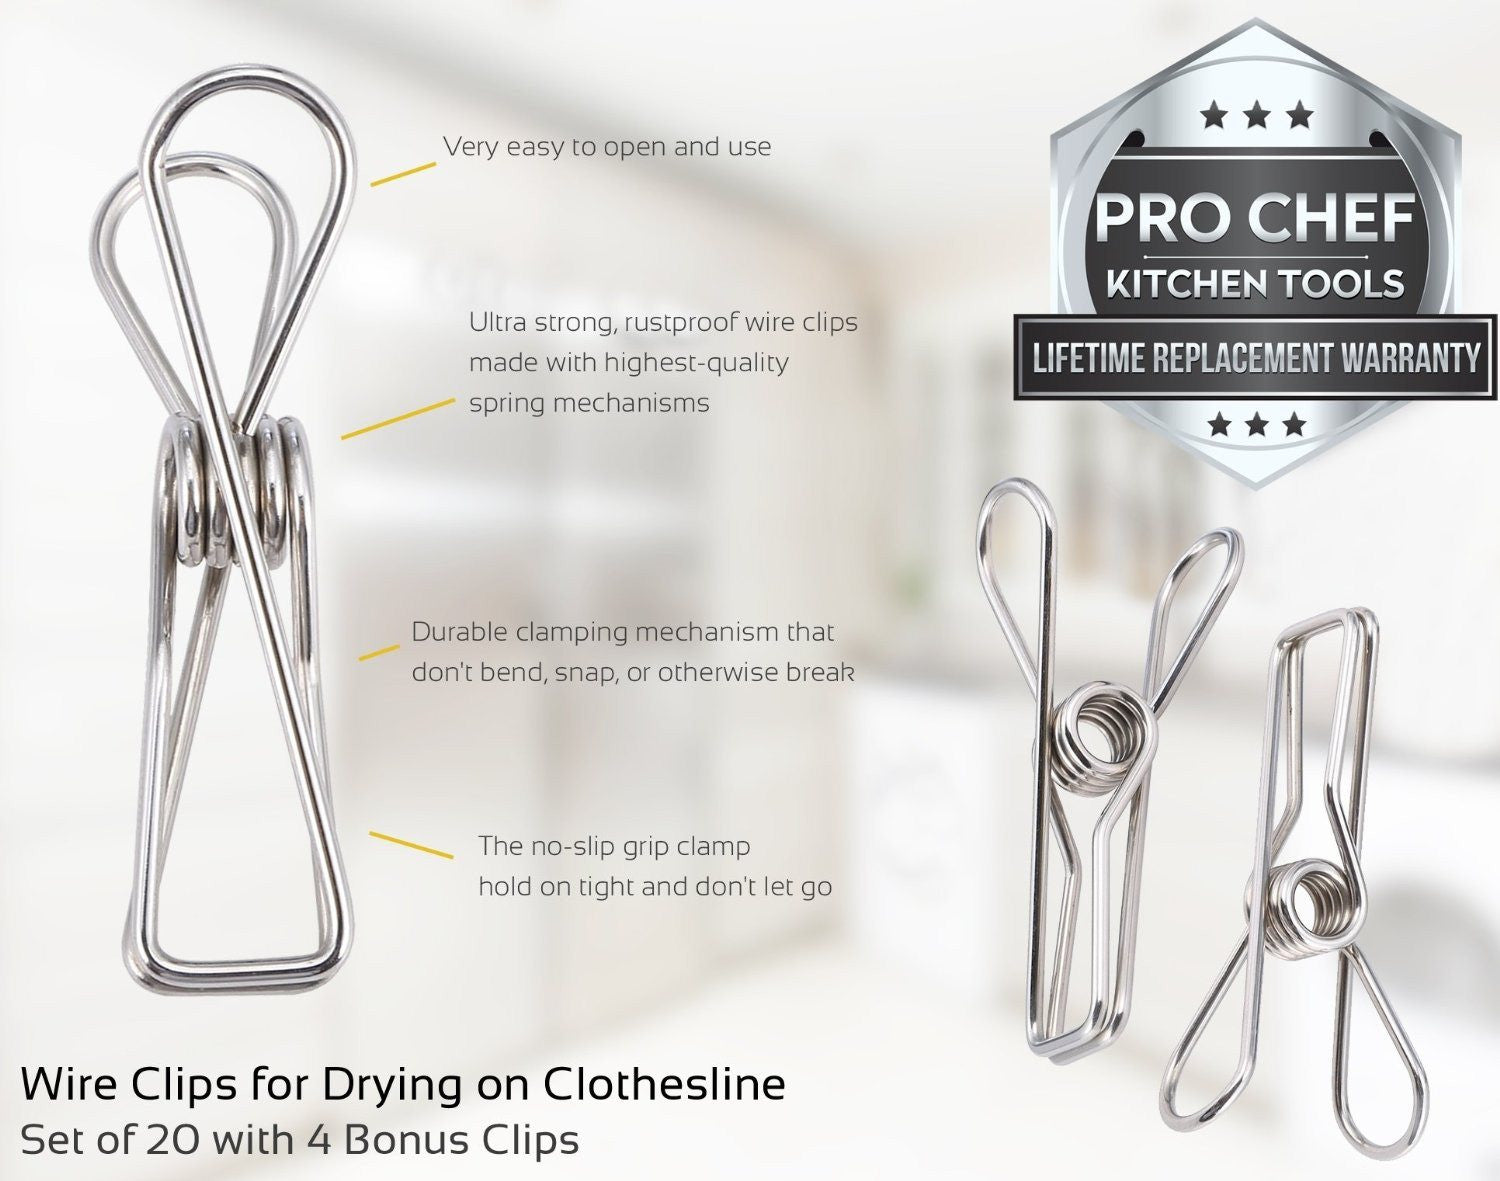 https://prochefkitchentools.com/cdn/shop/products/wire-clips-for-drying-on-clothesline-clothespins-for-laundry-set-of-20-bonus-of-4-clips-4.jpg?v=1530922940